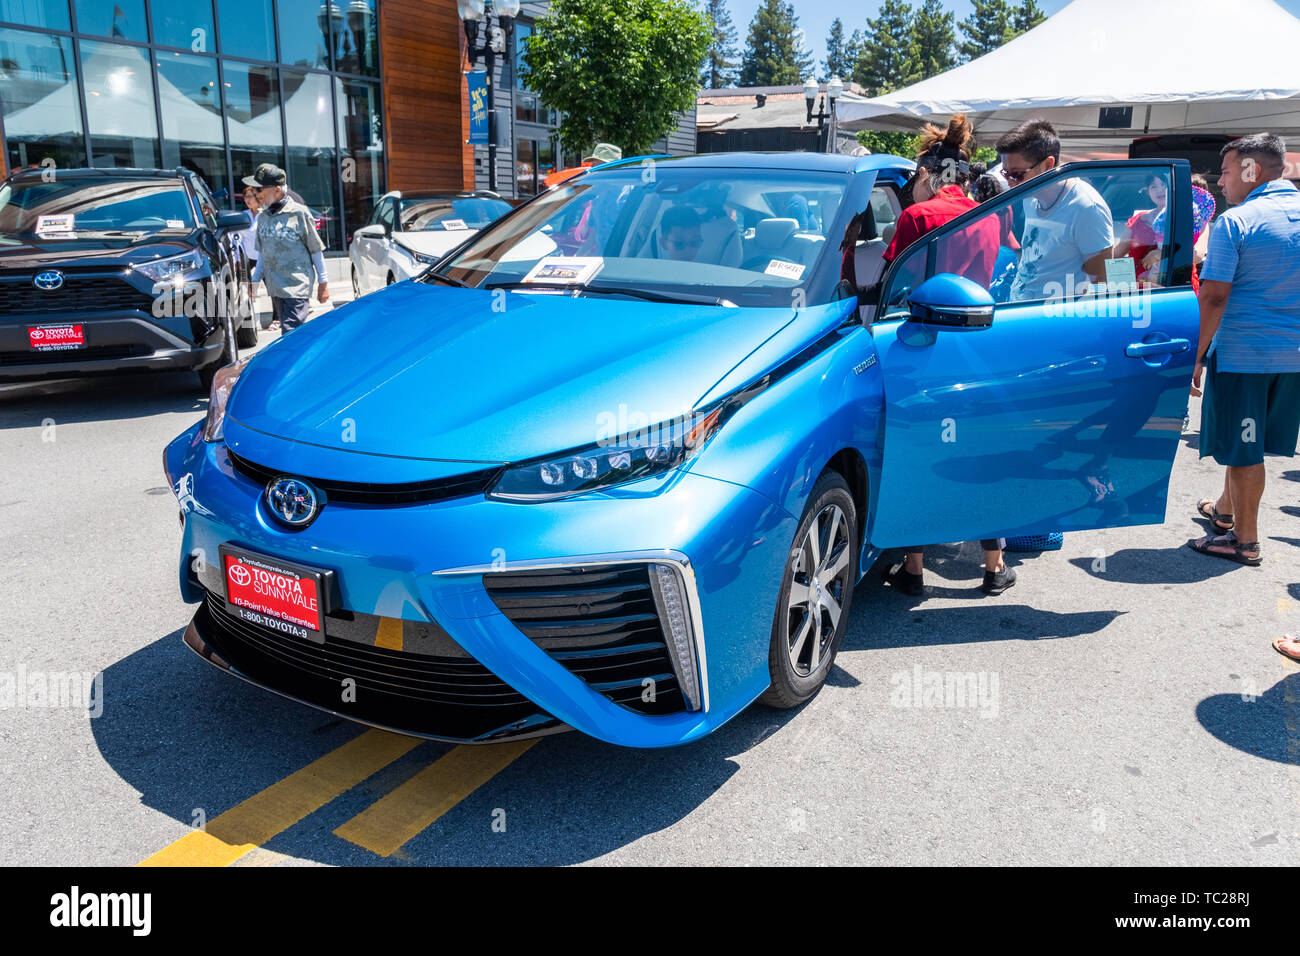 June 2, 2019 Sunnyvale / CA / USA - The Toyota Mirai fuelcell car (a mid-size hydrogen fuel cell car manufactured by Toyota) on display in downtown Su Stock Photo